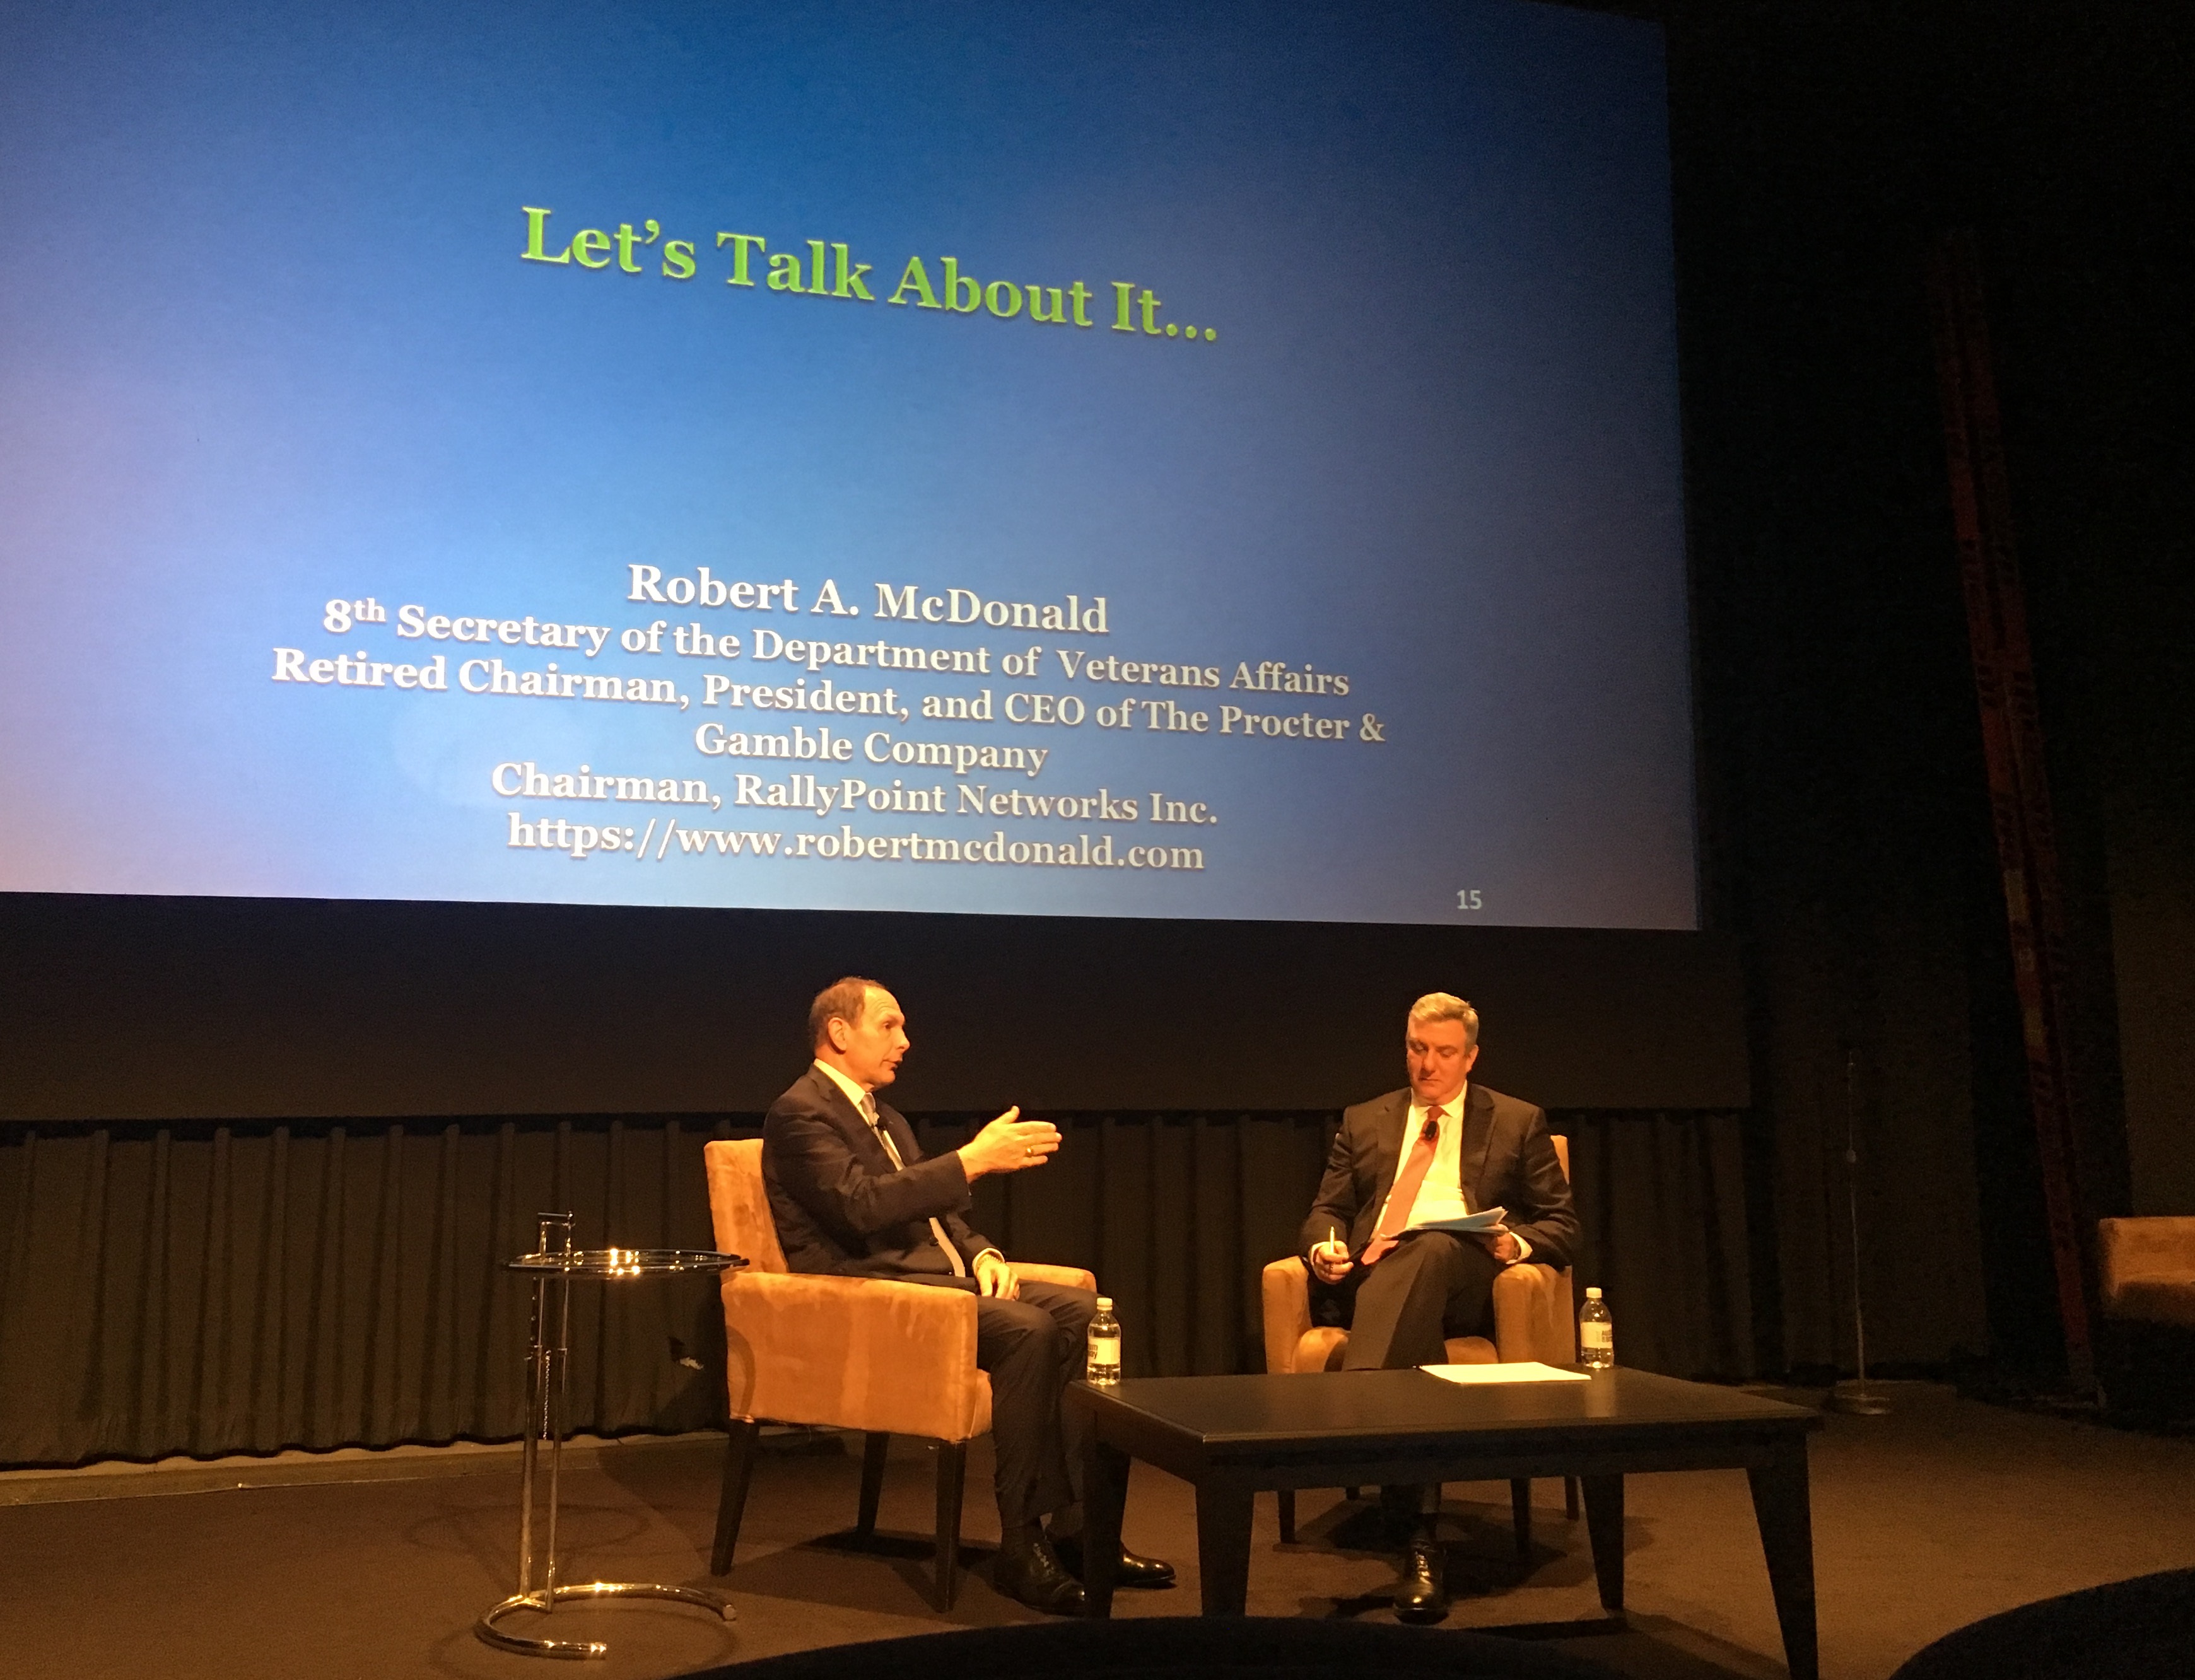 David Sandman, President and CEO of NYHealth, on stage with Robert A. McDonald, former Secretary of the Department of Veterans Affairs, at an NYHealth conference.